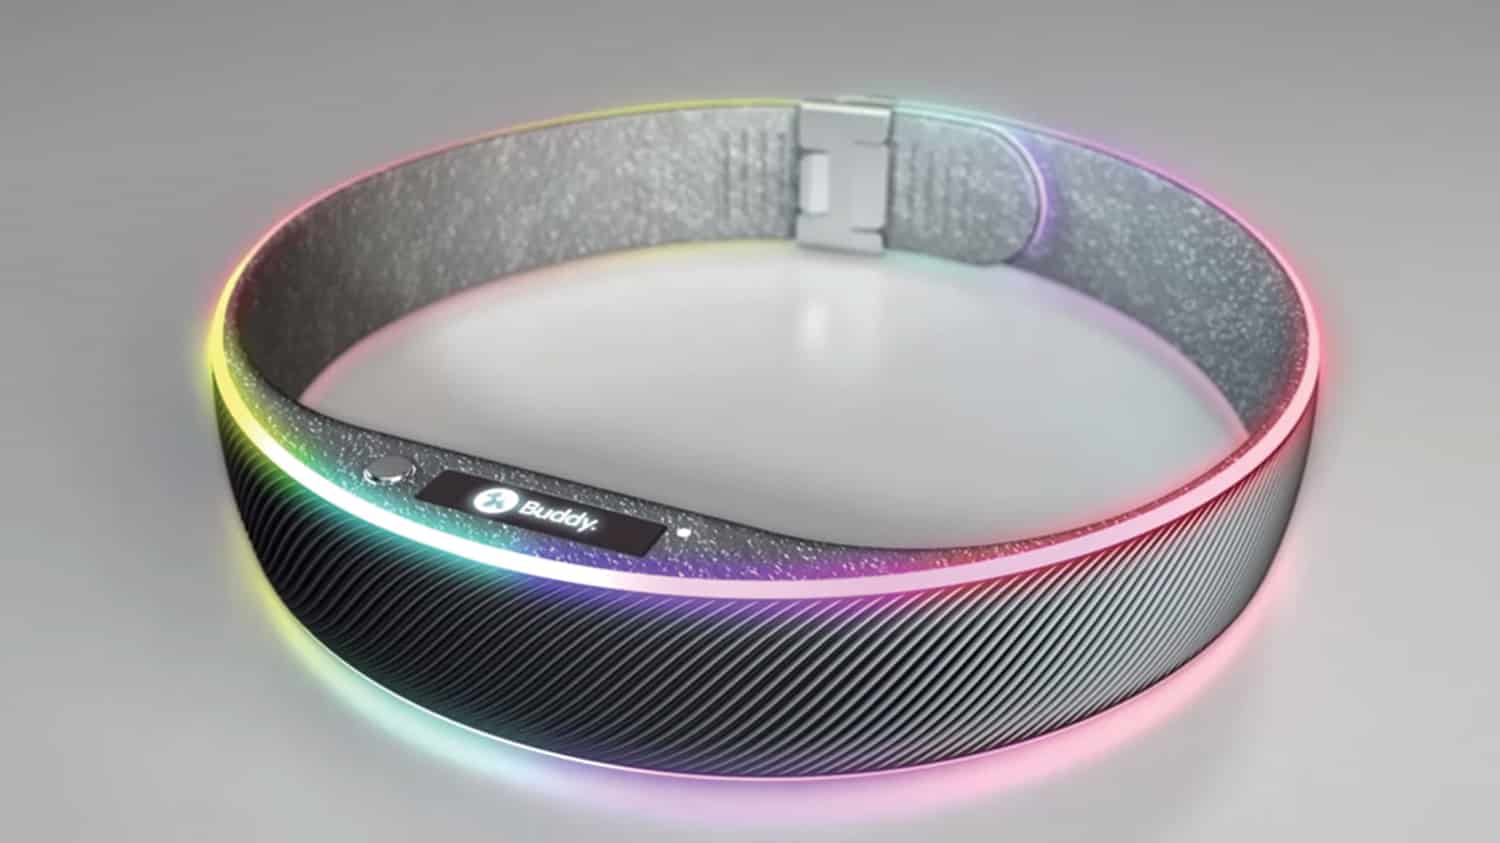 The smart collar that can track your pet's health and exercise habits